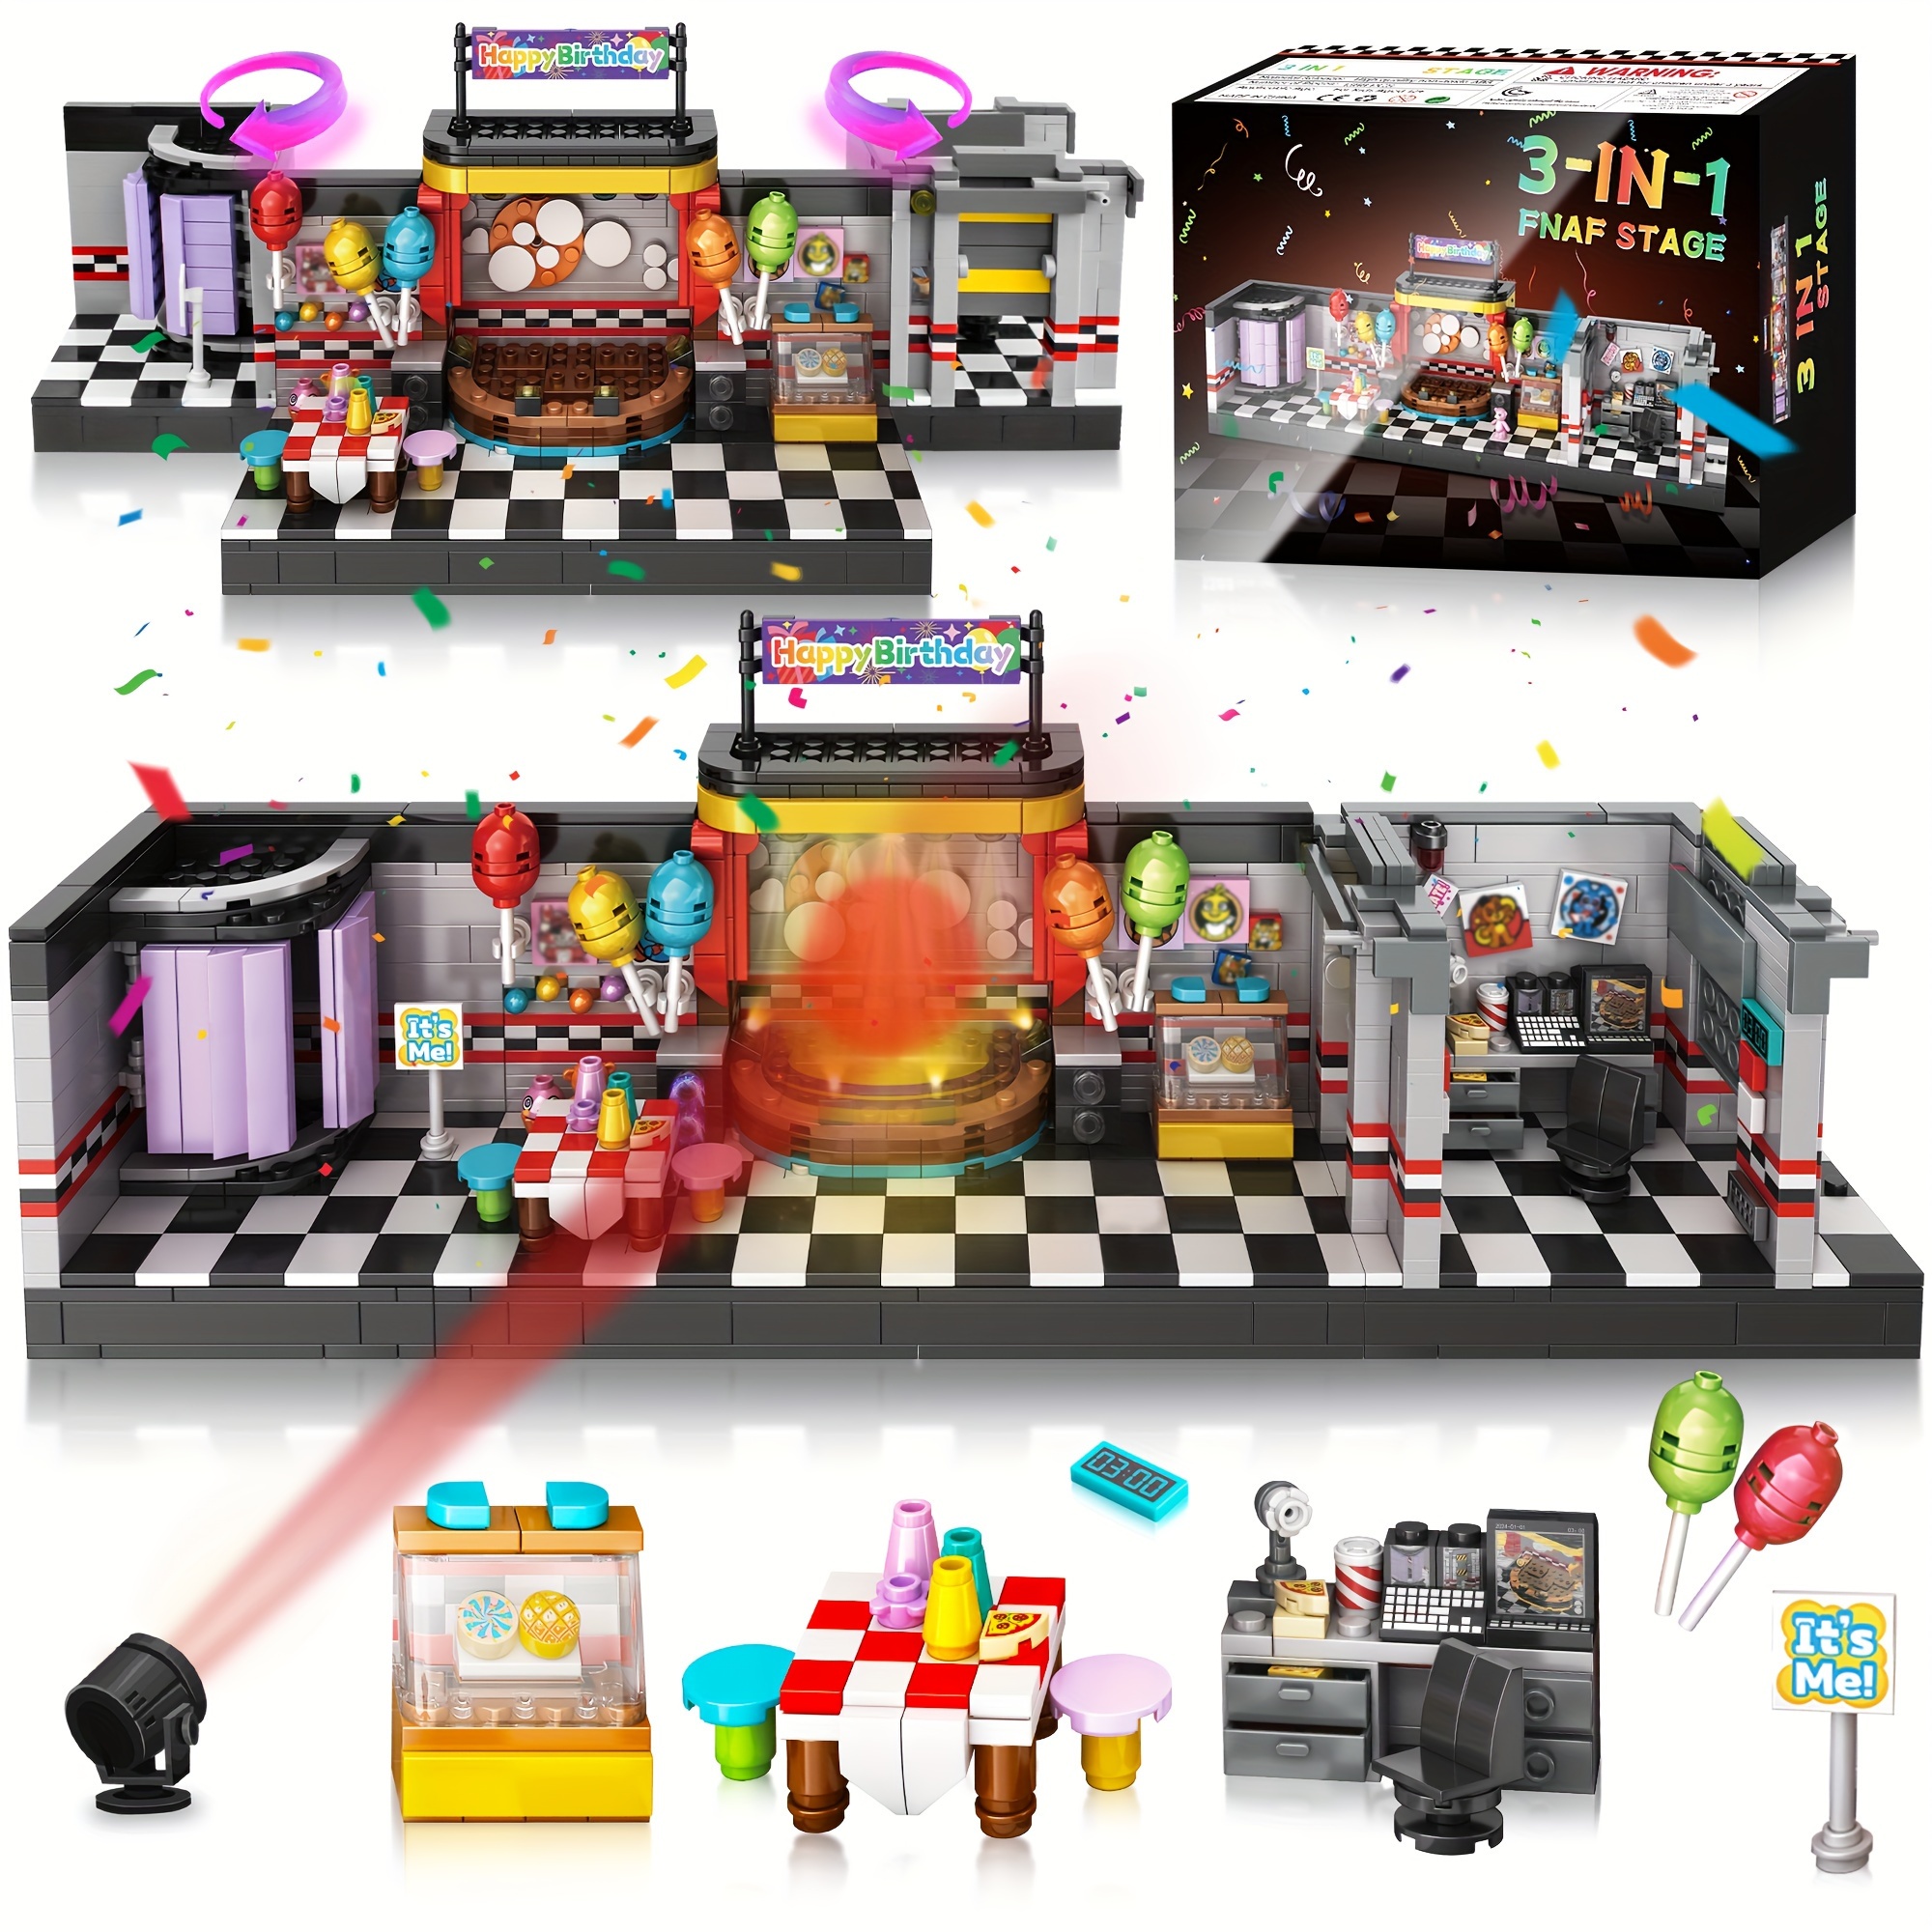 

5 Nights Security Breach Stage Building Blocks Toys, Classic Horror Game Stage Building Set, Home Decoration Great Birthday Gifts For Teens, Collectible Gifts For Game Fans (1388pcs)